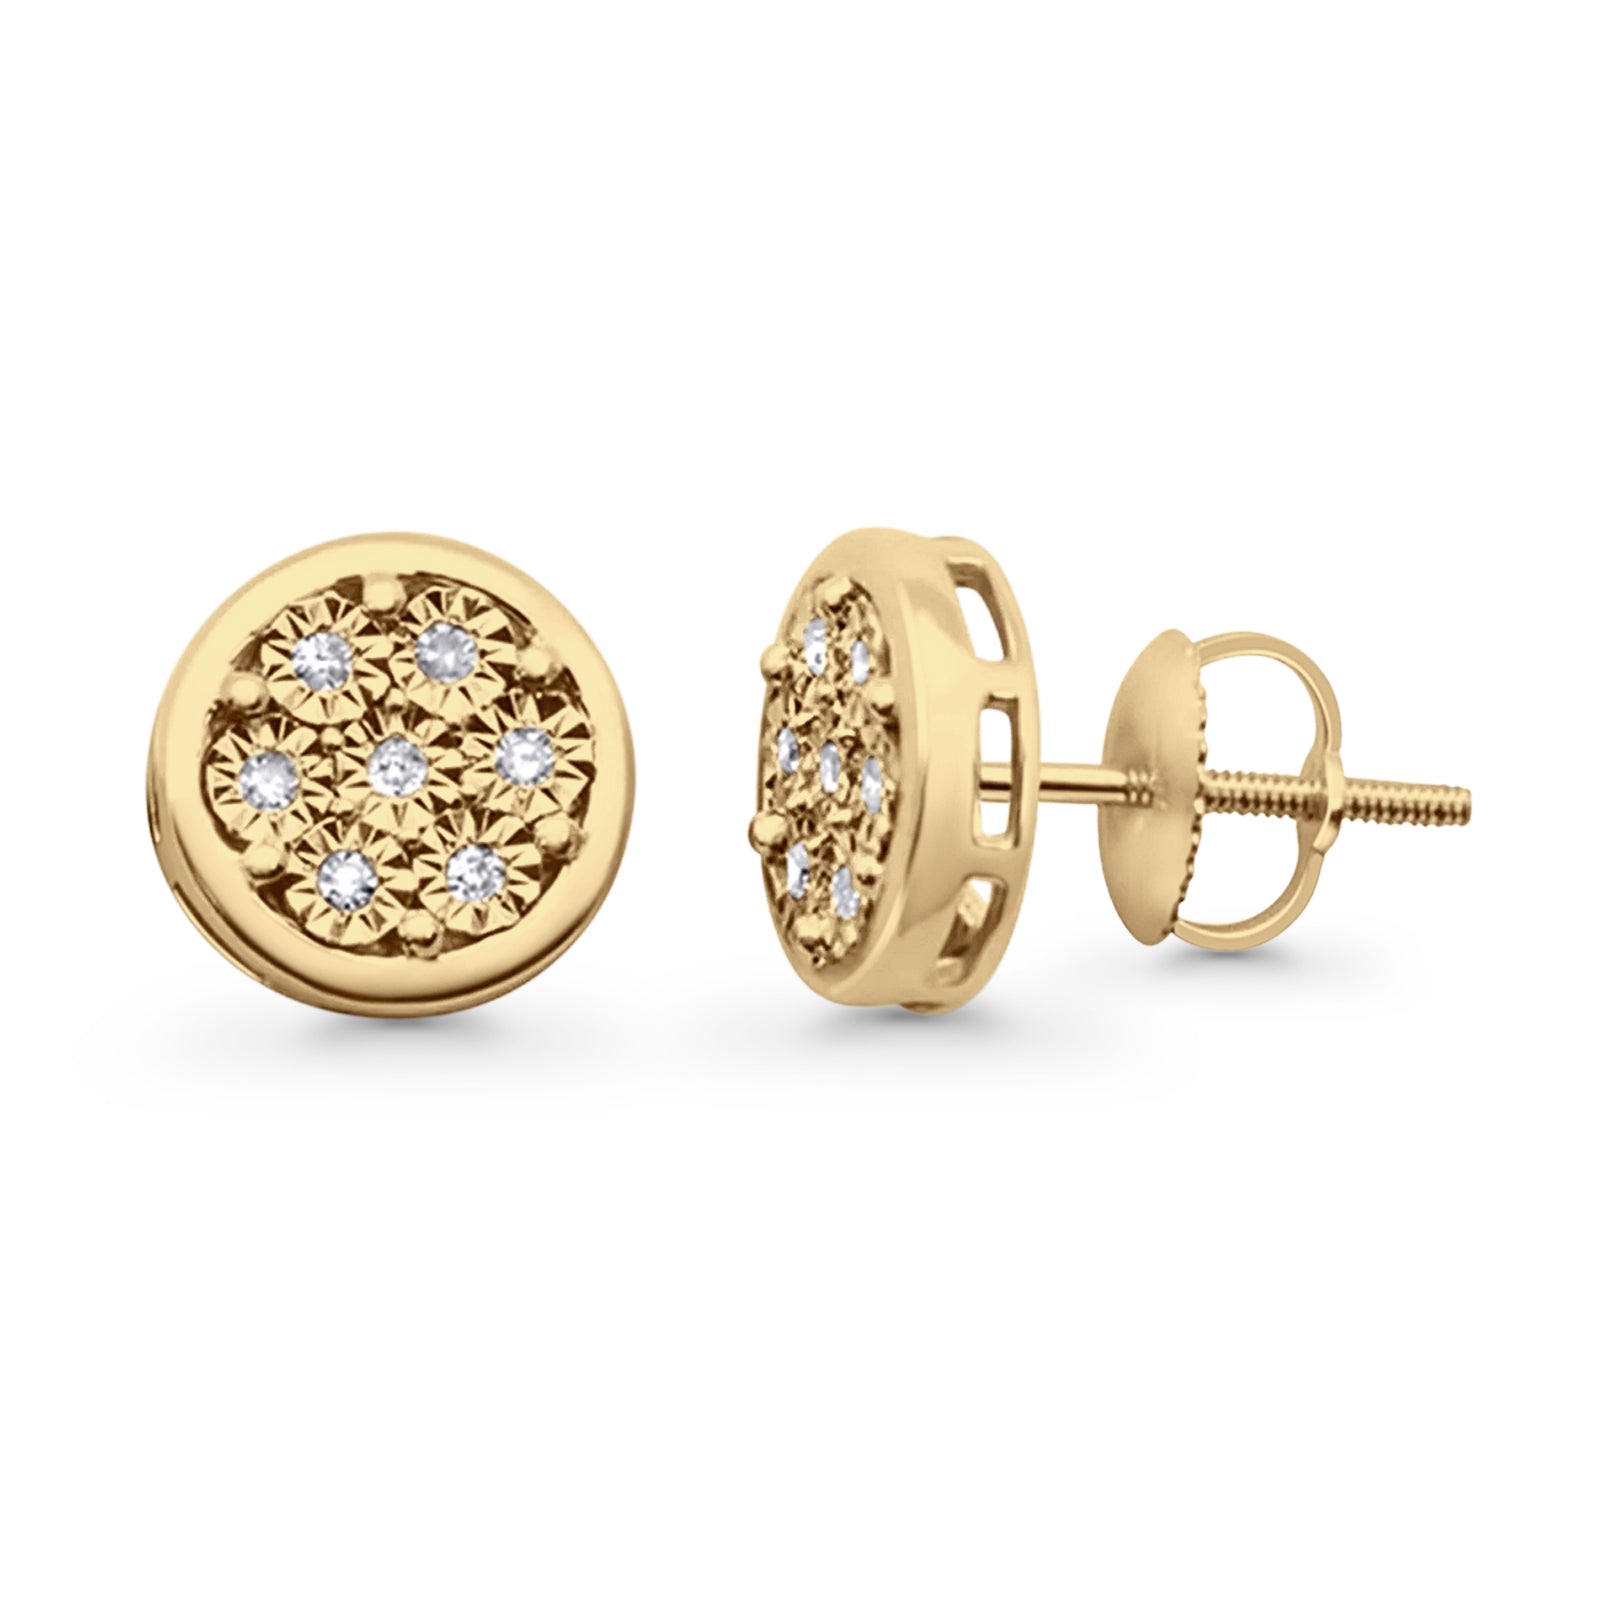 Solid 10K Gold 9.8mm Round Flower Design Pave Setting Diamond Stud Earring